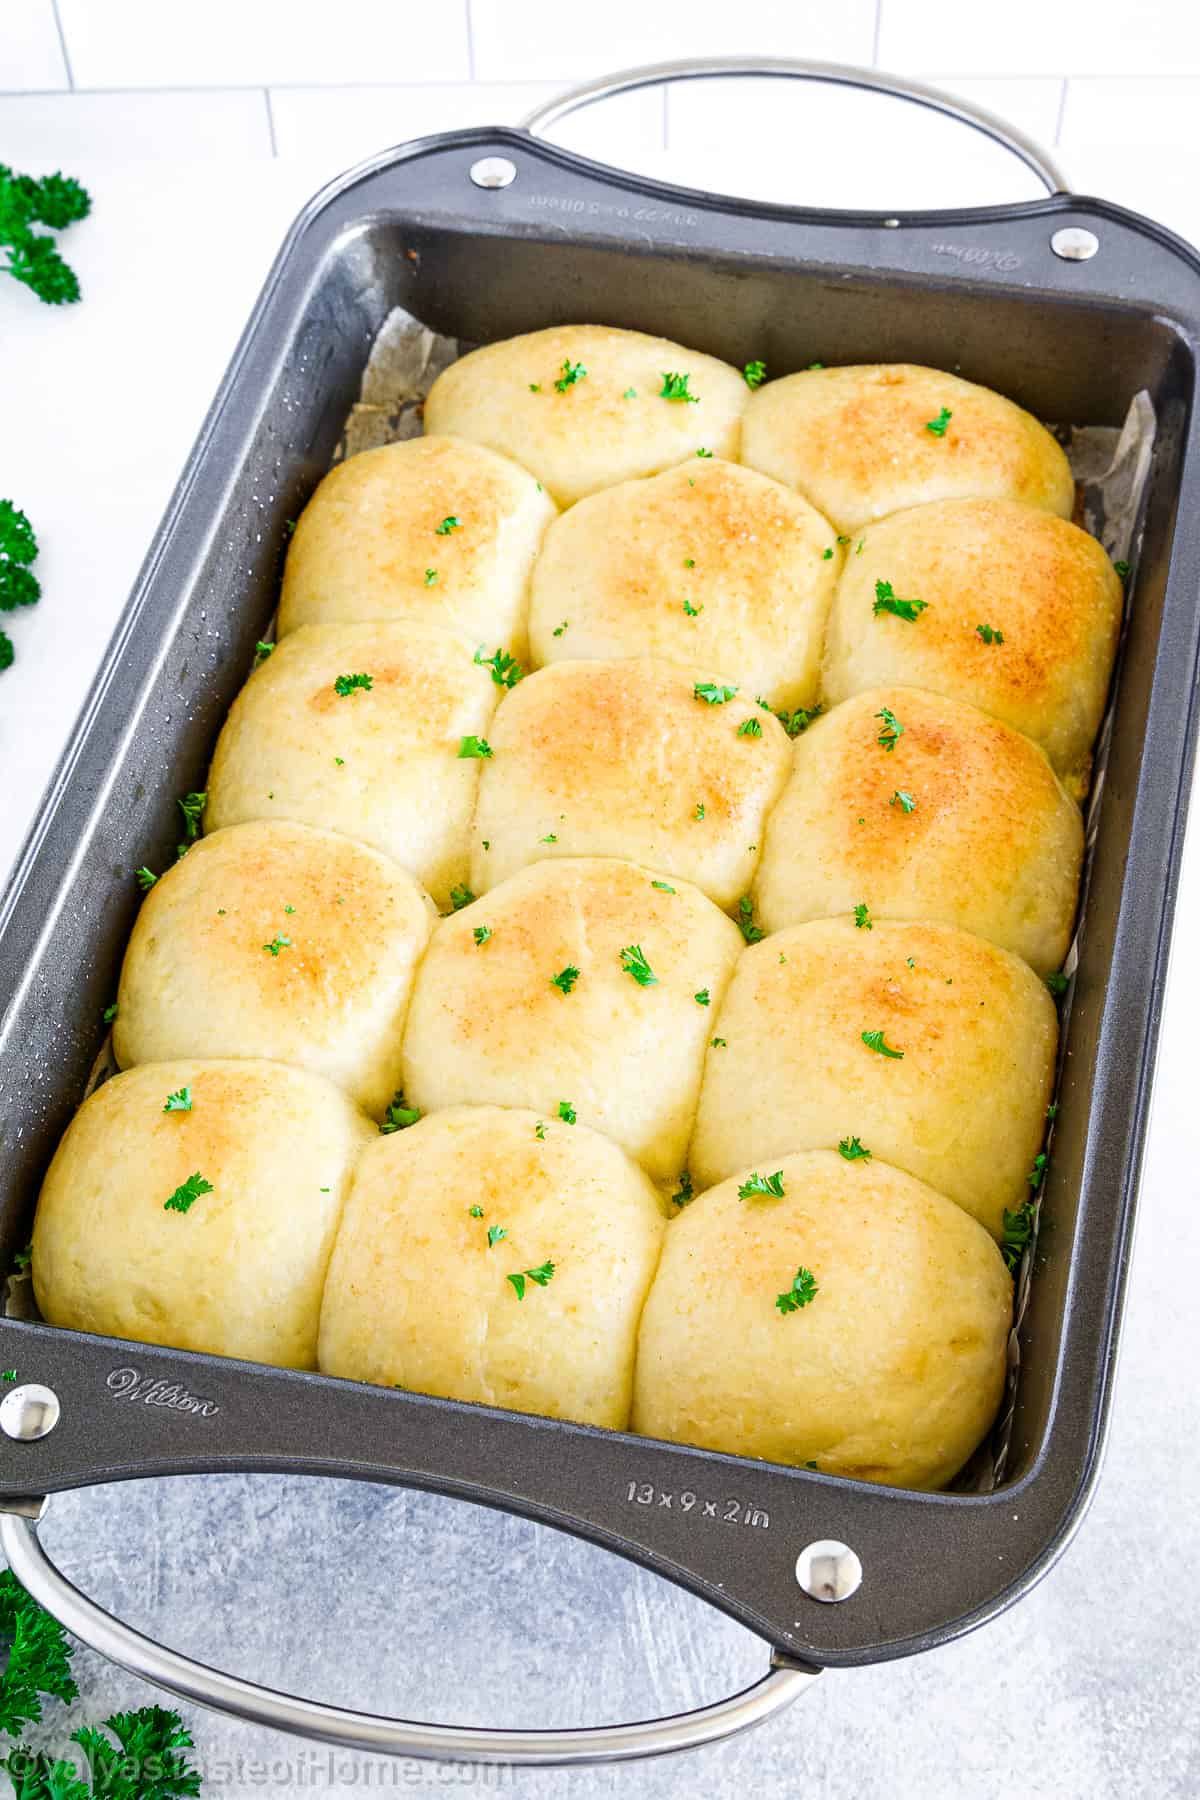 Garlic dinner rolls are rolls or bread that are flavored with garlic.